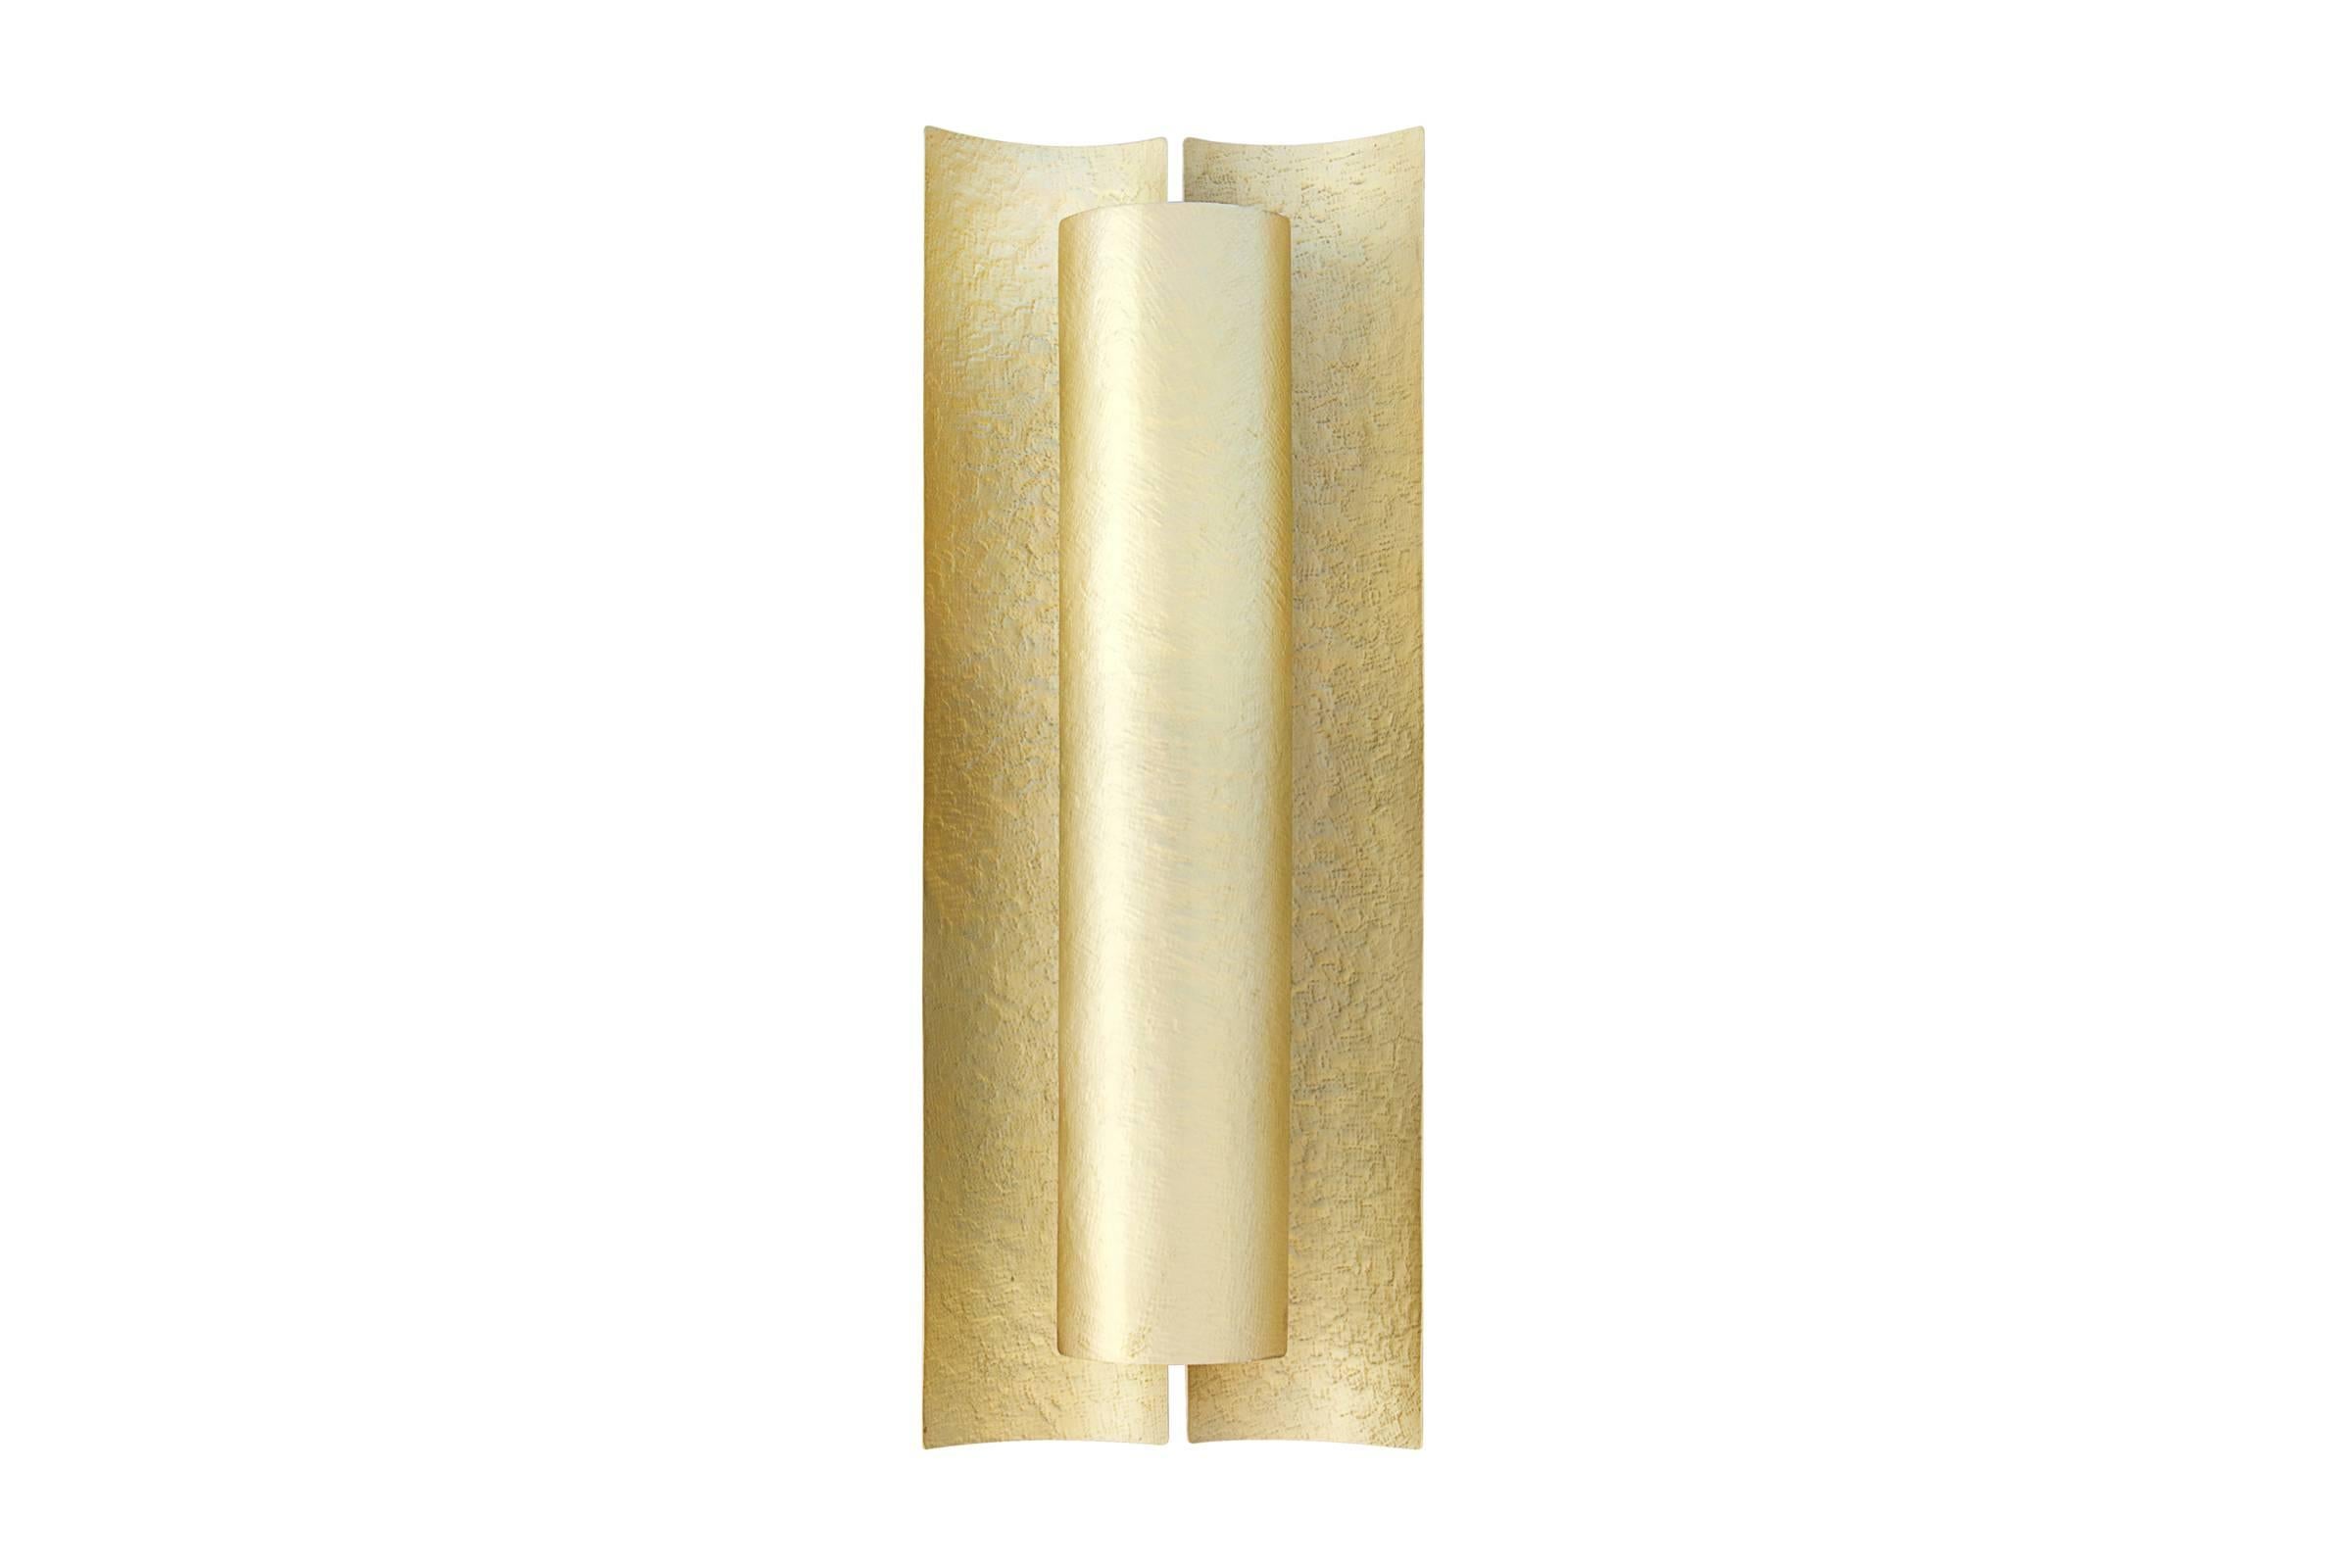 Wall light Aurora is a lighting design piece 
that will bring you confort in the darkest nights 
with it's warm and sensitive light.
Made with hammered brass sheets.
Two bulbs, 220-240V / 40 watts.
